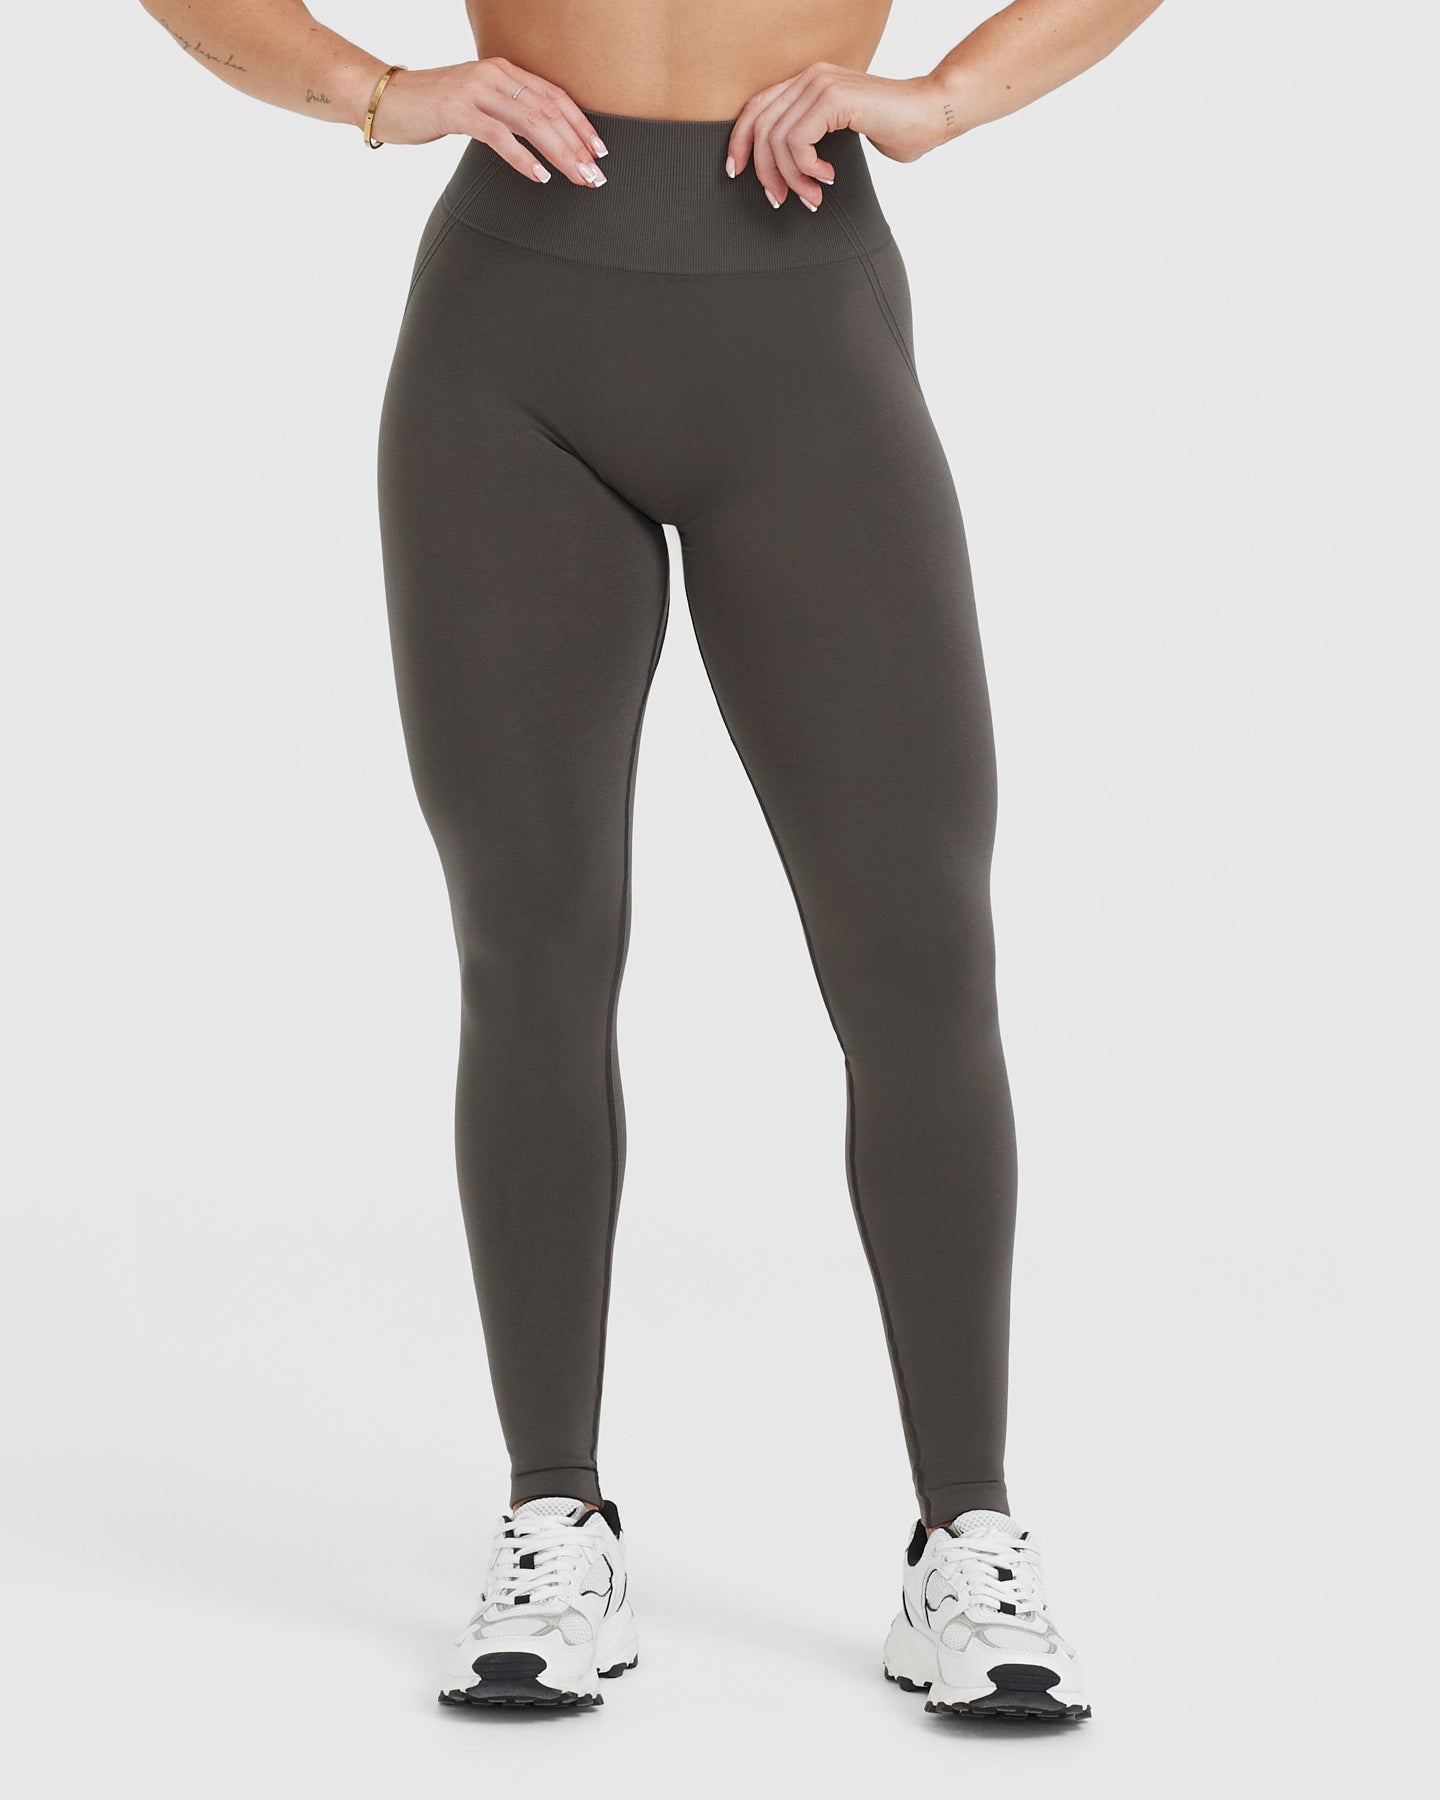 My Best Assets High Waisted Side Pocket Leggings (Taupe)